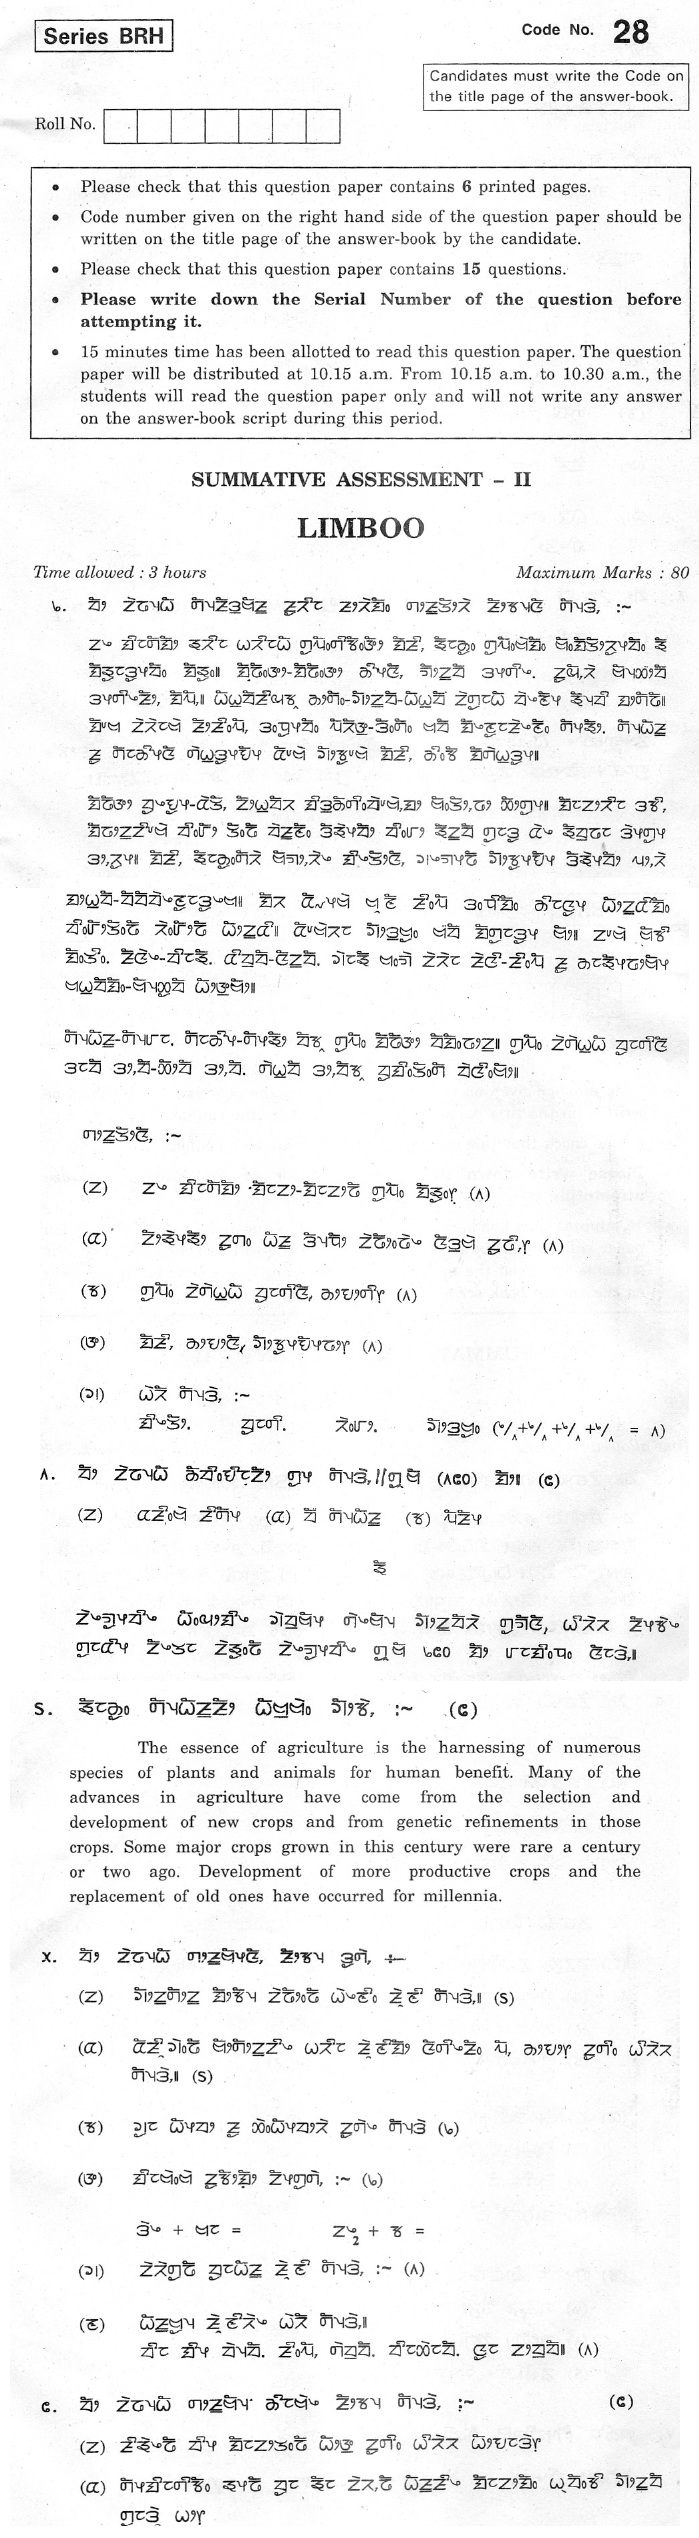 CBSE Class X Previous Year Question Papers 2012 Limboo